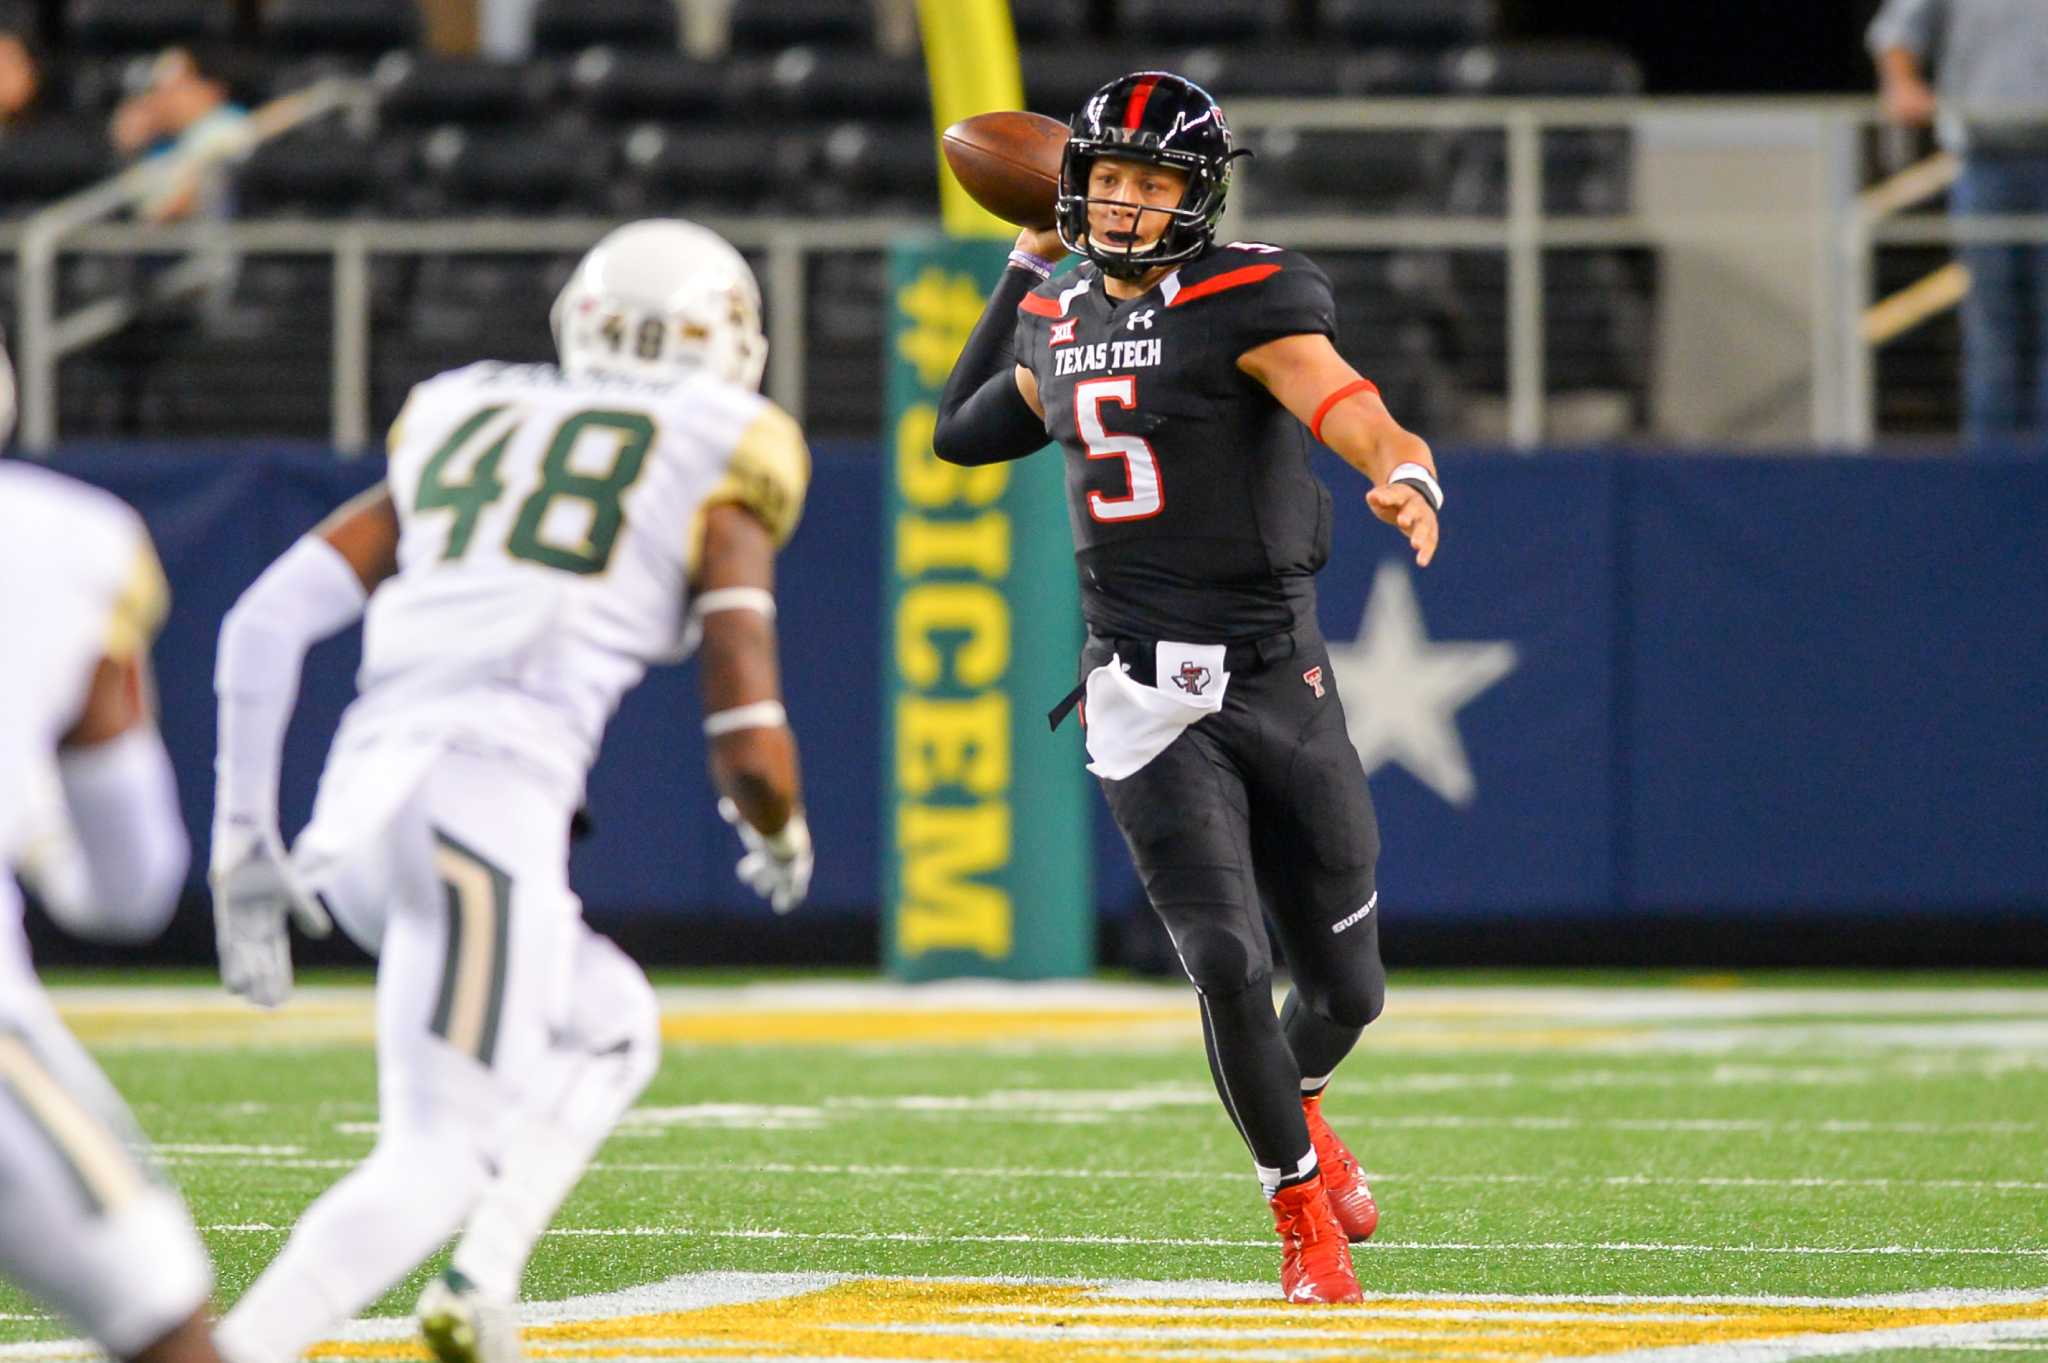 Patrick Mahomes' lone pitching appearance at Texas Tech was awful